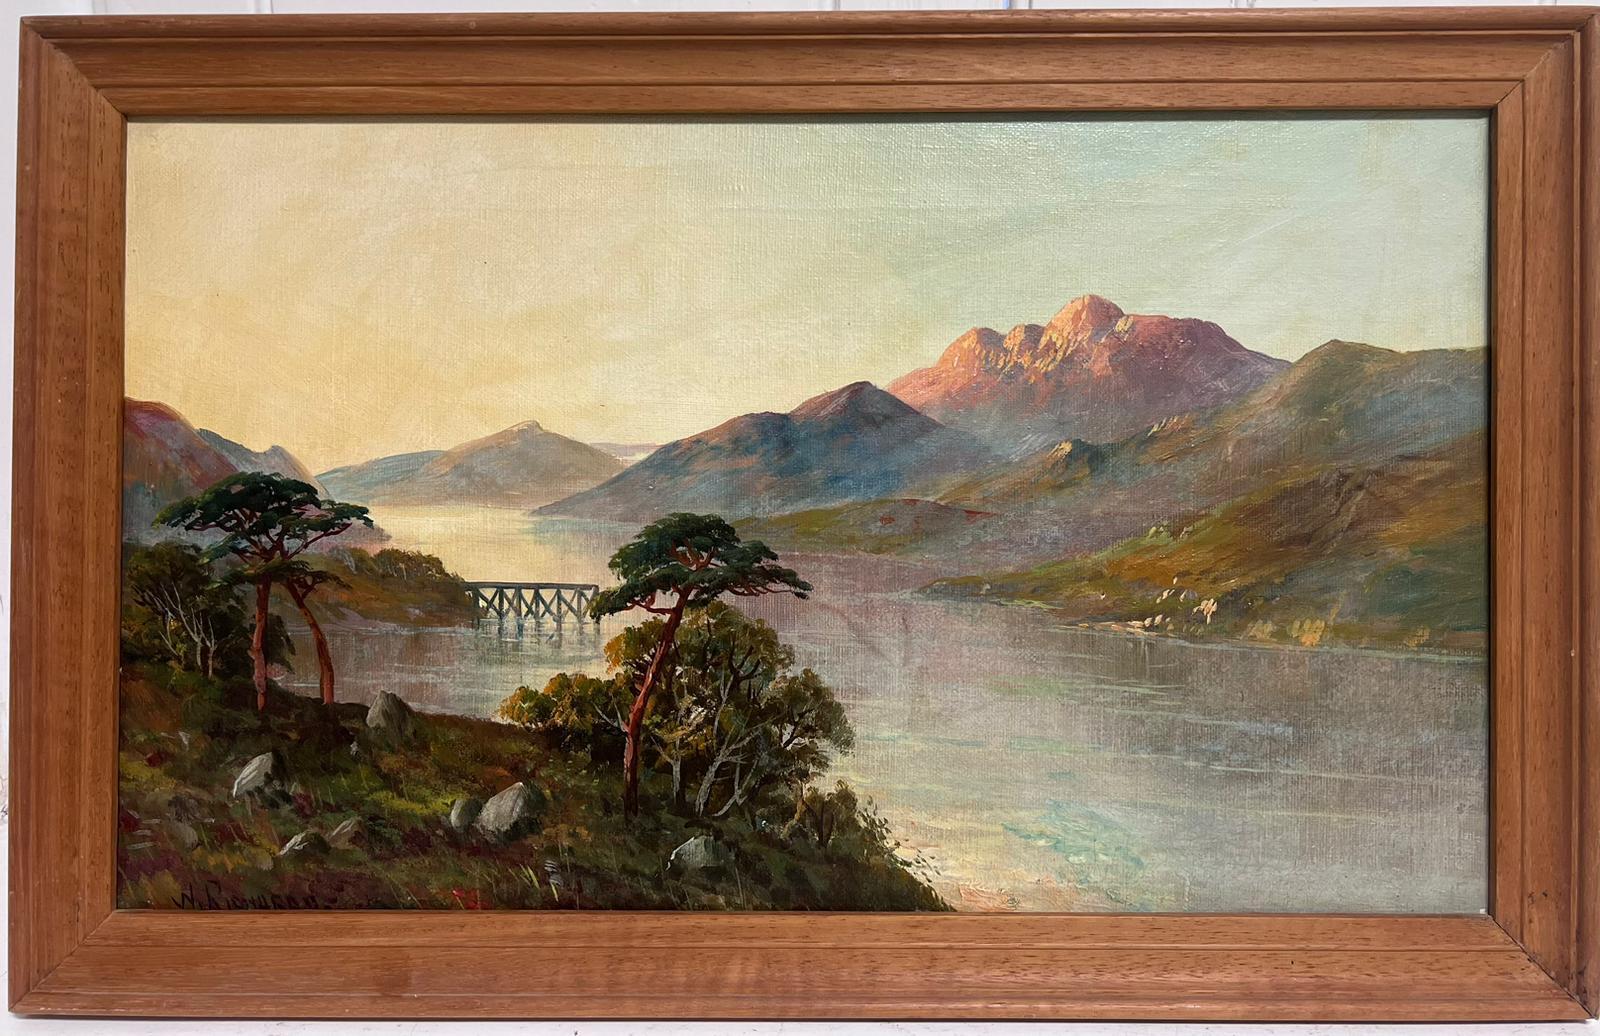 Artist/ School: F. E. Jamieson British (signed with the artists pseudonyn 'W. Richards'). 

Title: Luss, Loch Lomond (Scottish Highlands)

Medium: Oil on canvas, framed

Size:
framed: 13.5 x 21.5 inches
canvas : 12 x 20 inches

Provenance: from a